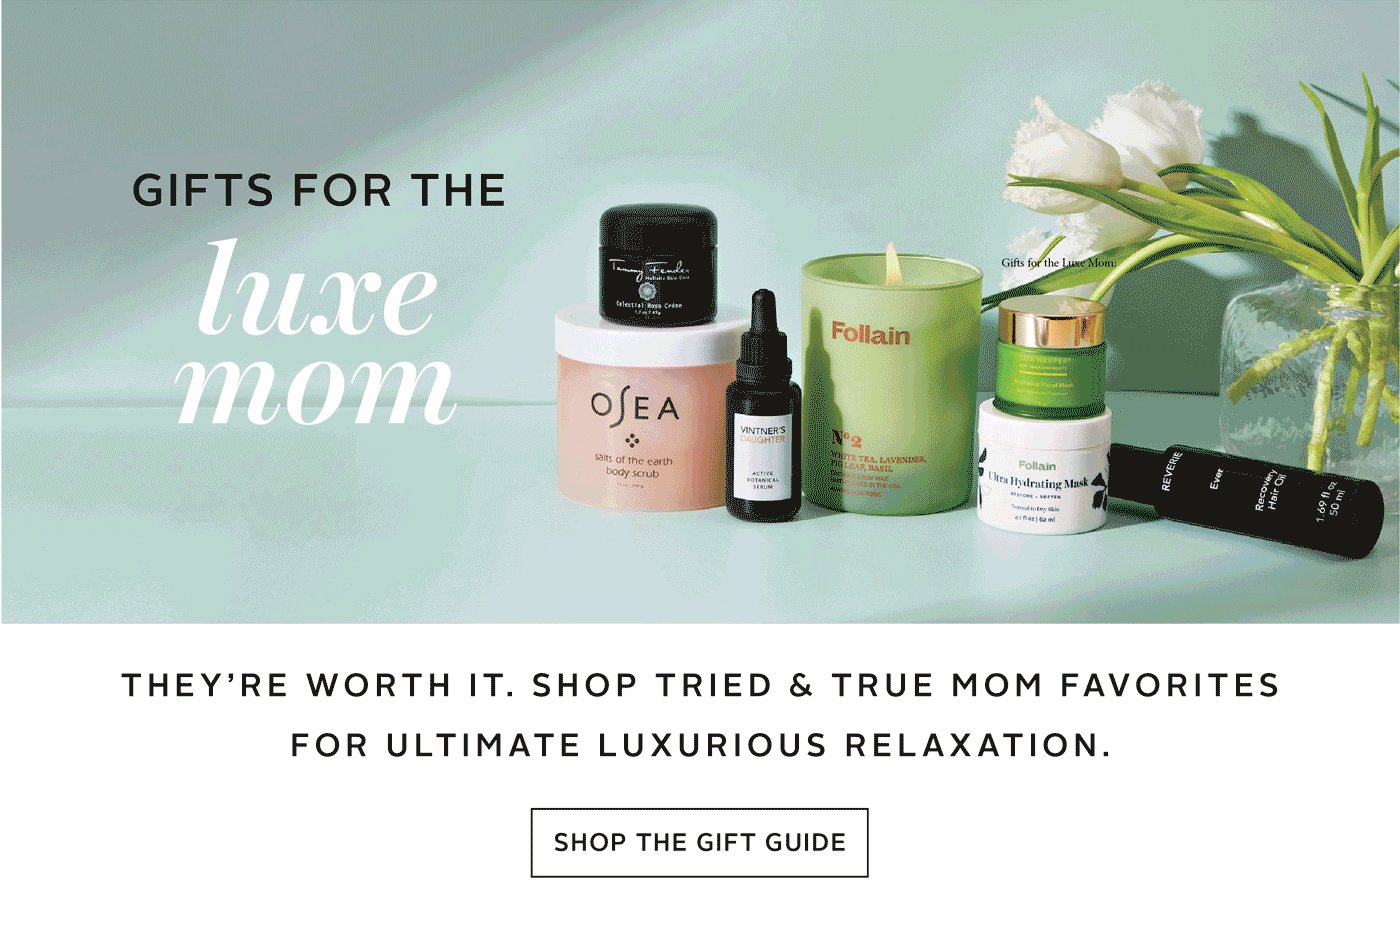 Gifts for the luxe mom!